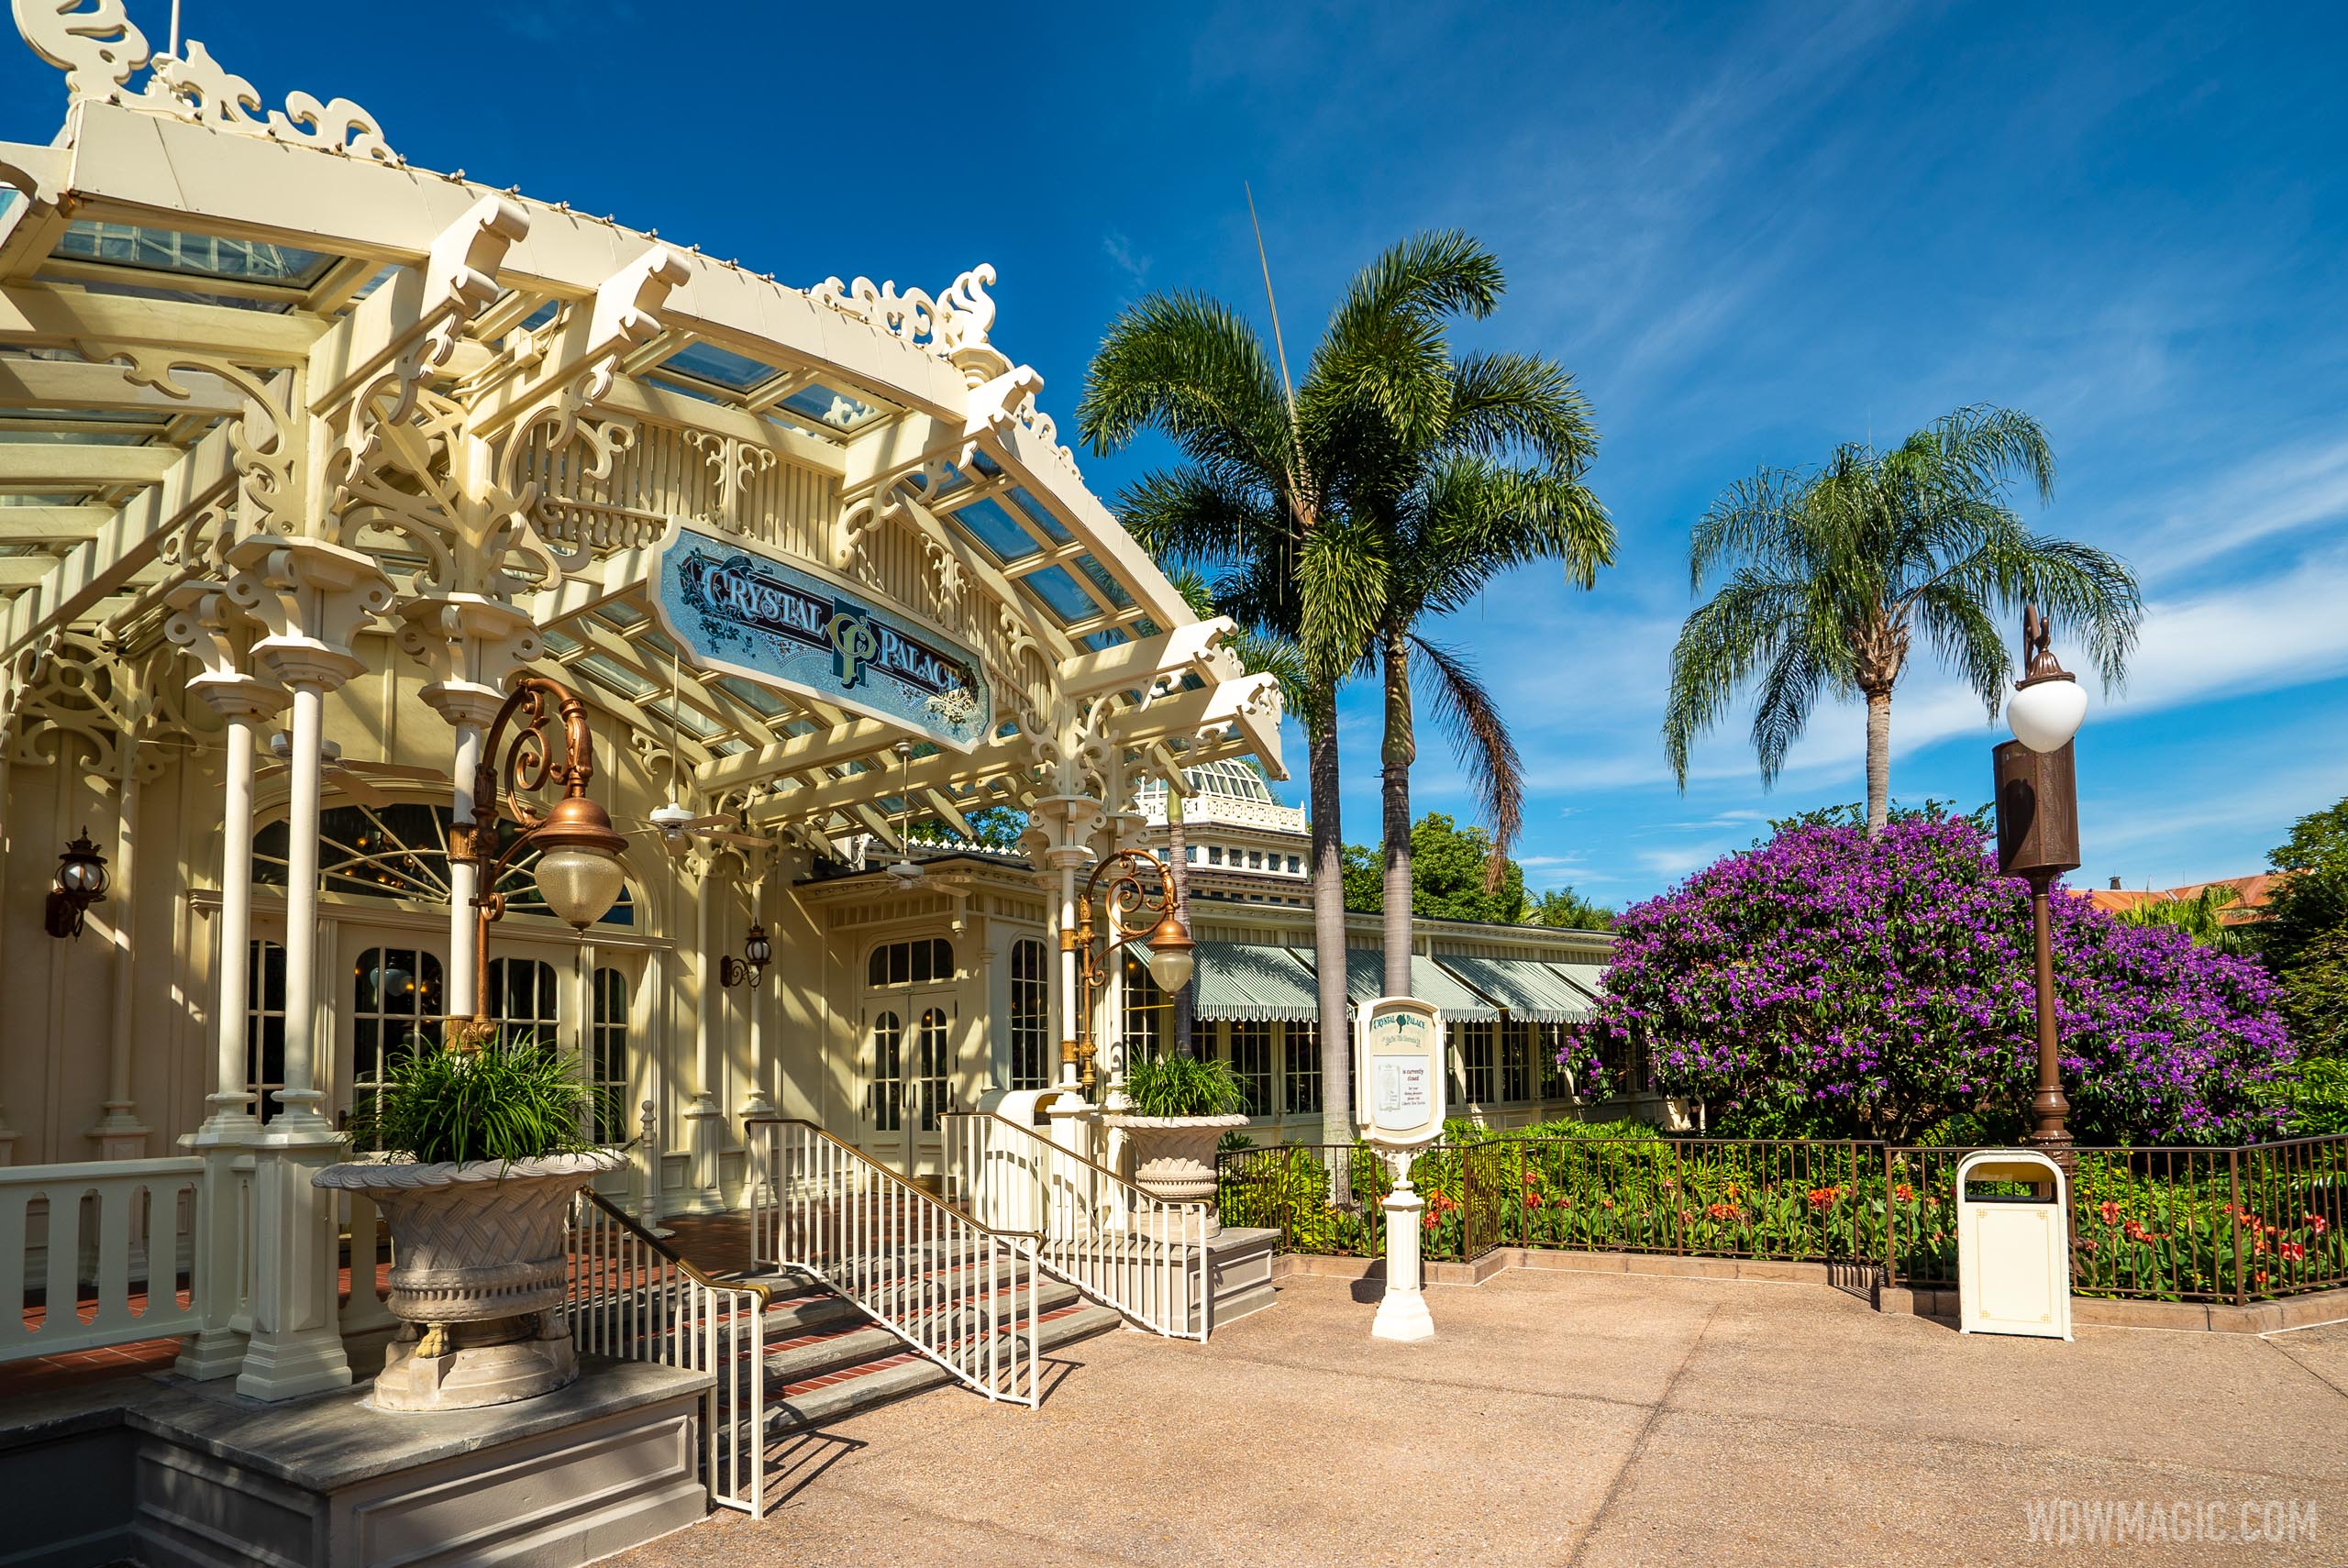 The Crystal Palace, Tomorrowland Terrace and Woody’s Lunchbox reopening dates announced